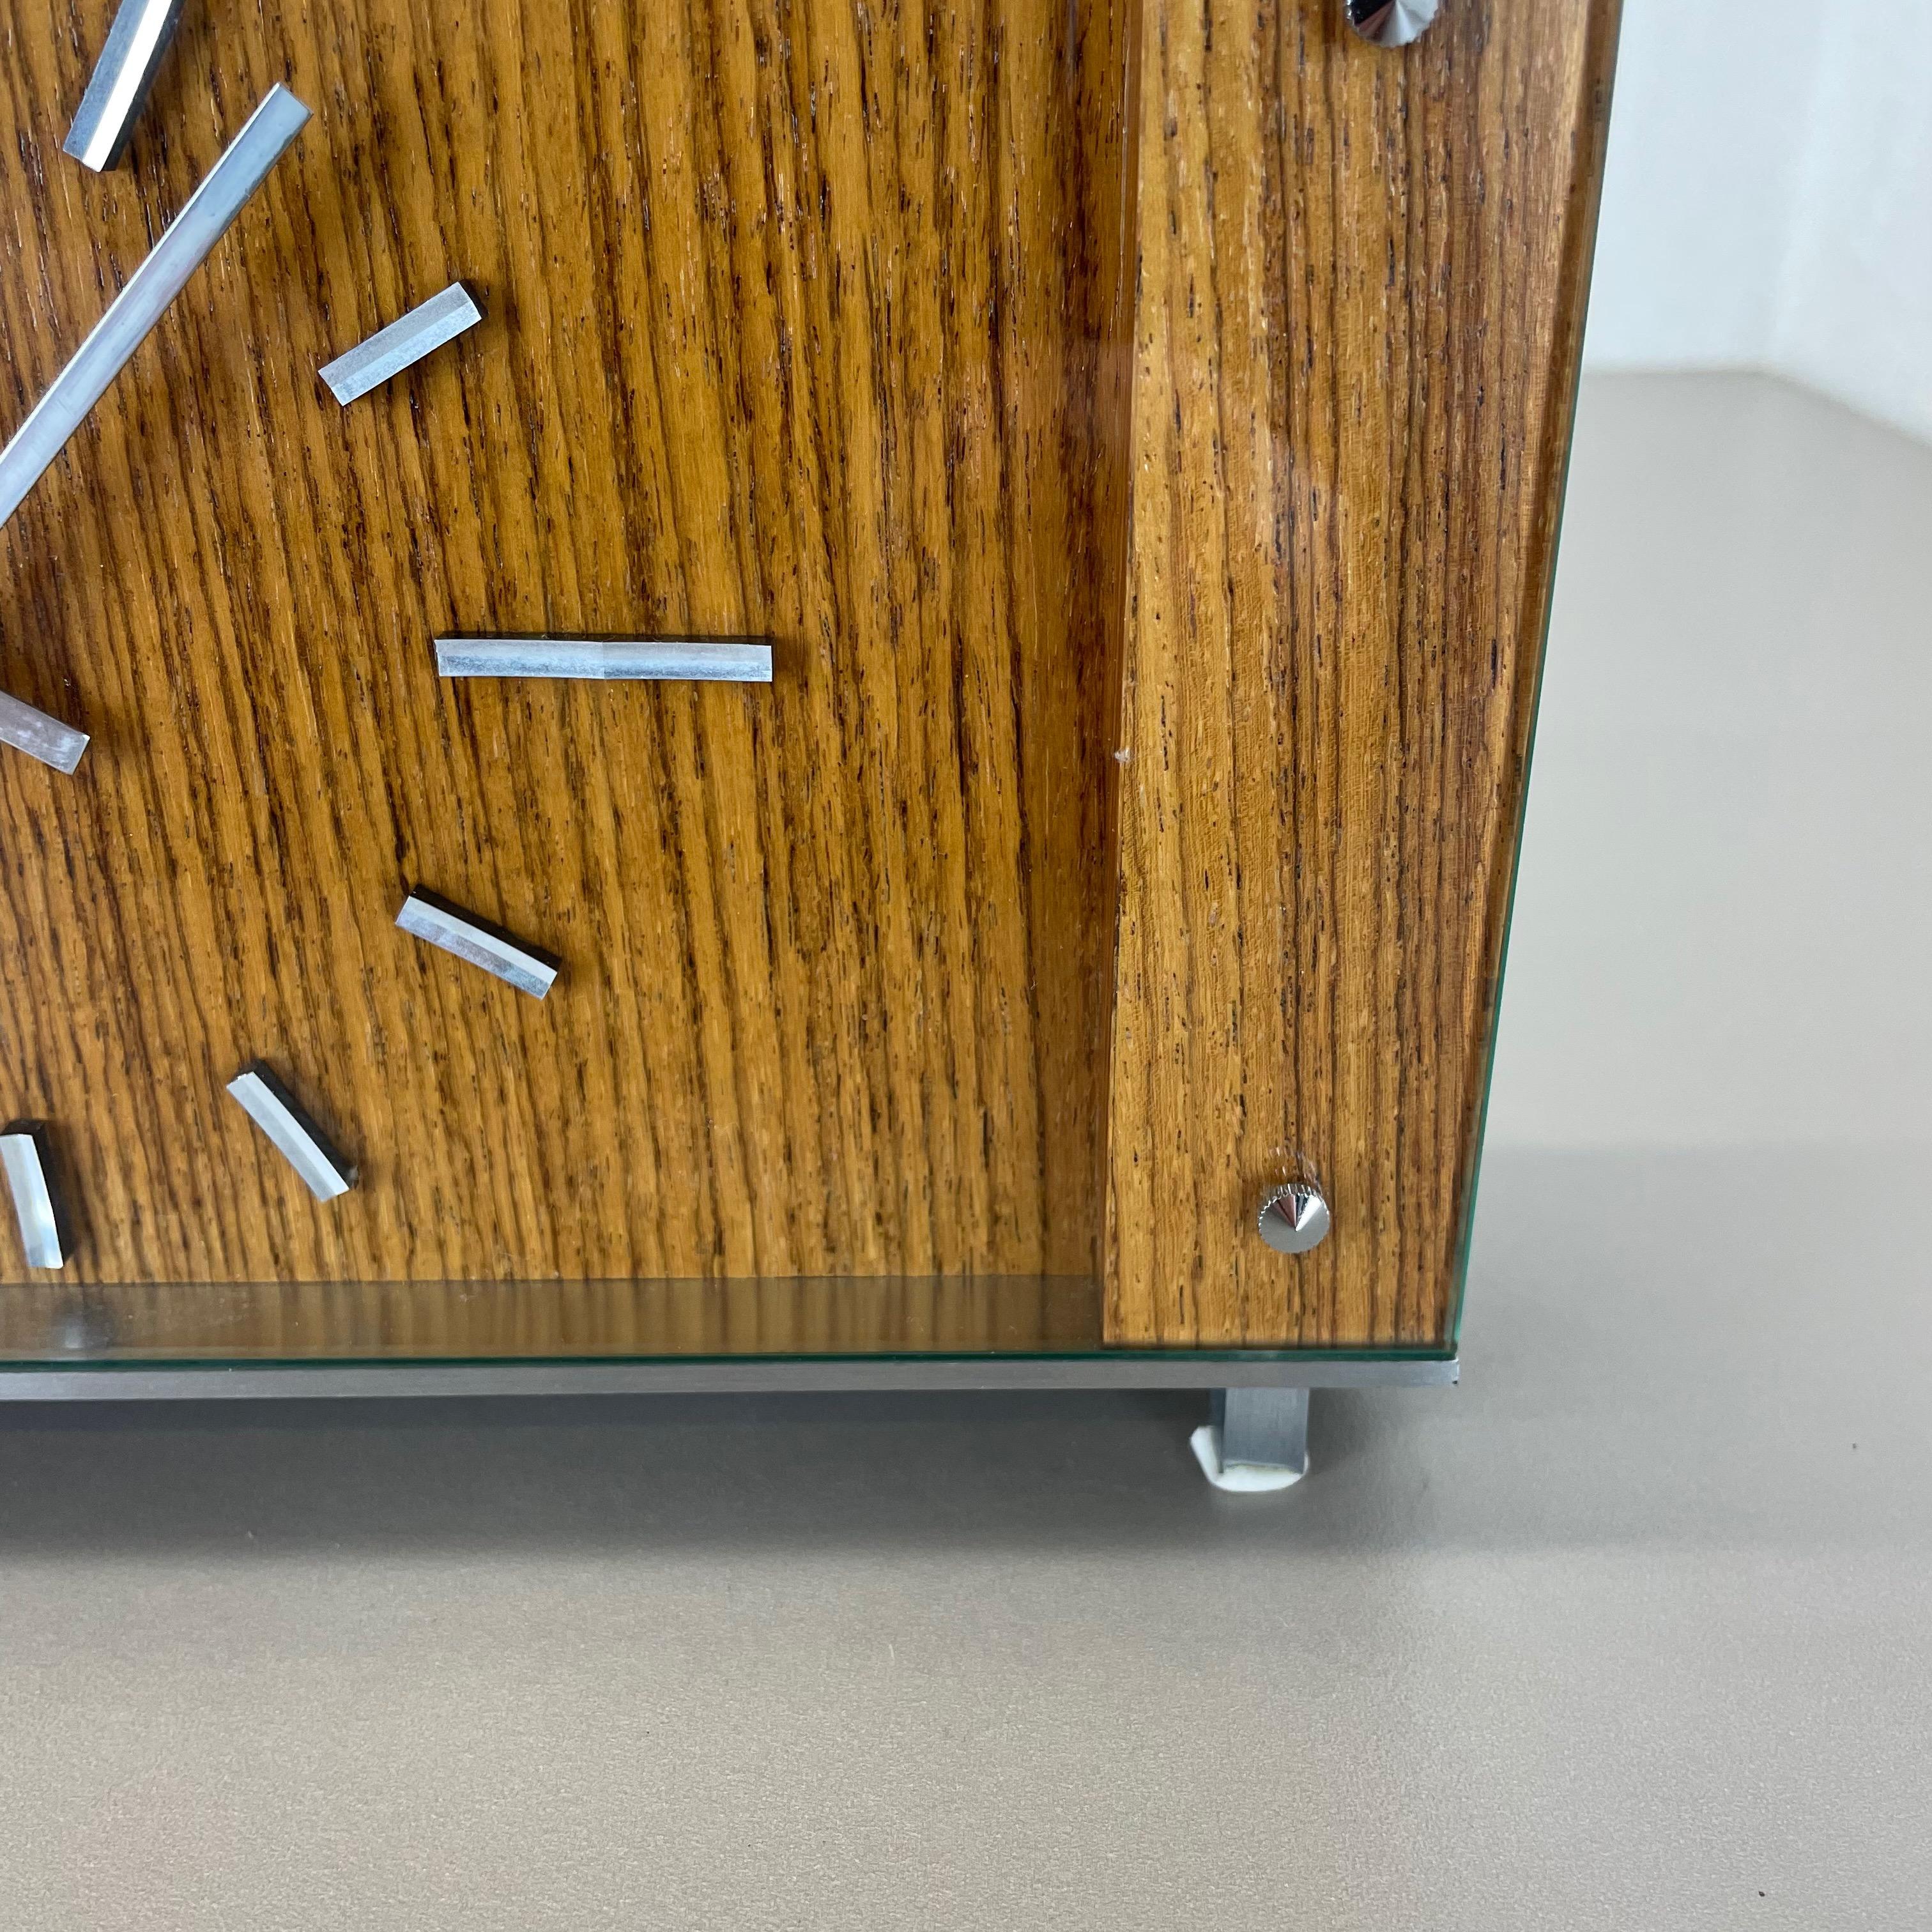 Vintage Modernist Wooden Teak Metal Table Clock by Zentra, Germany 1970s In Good Condition For Sale In Kirchlengern, DE